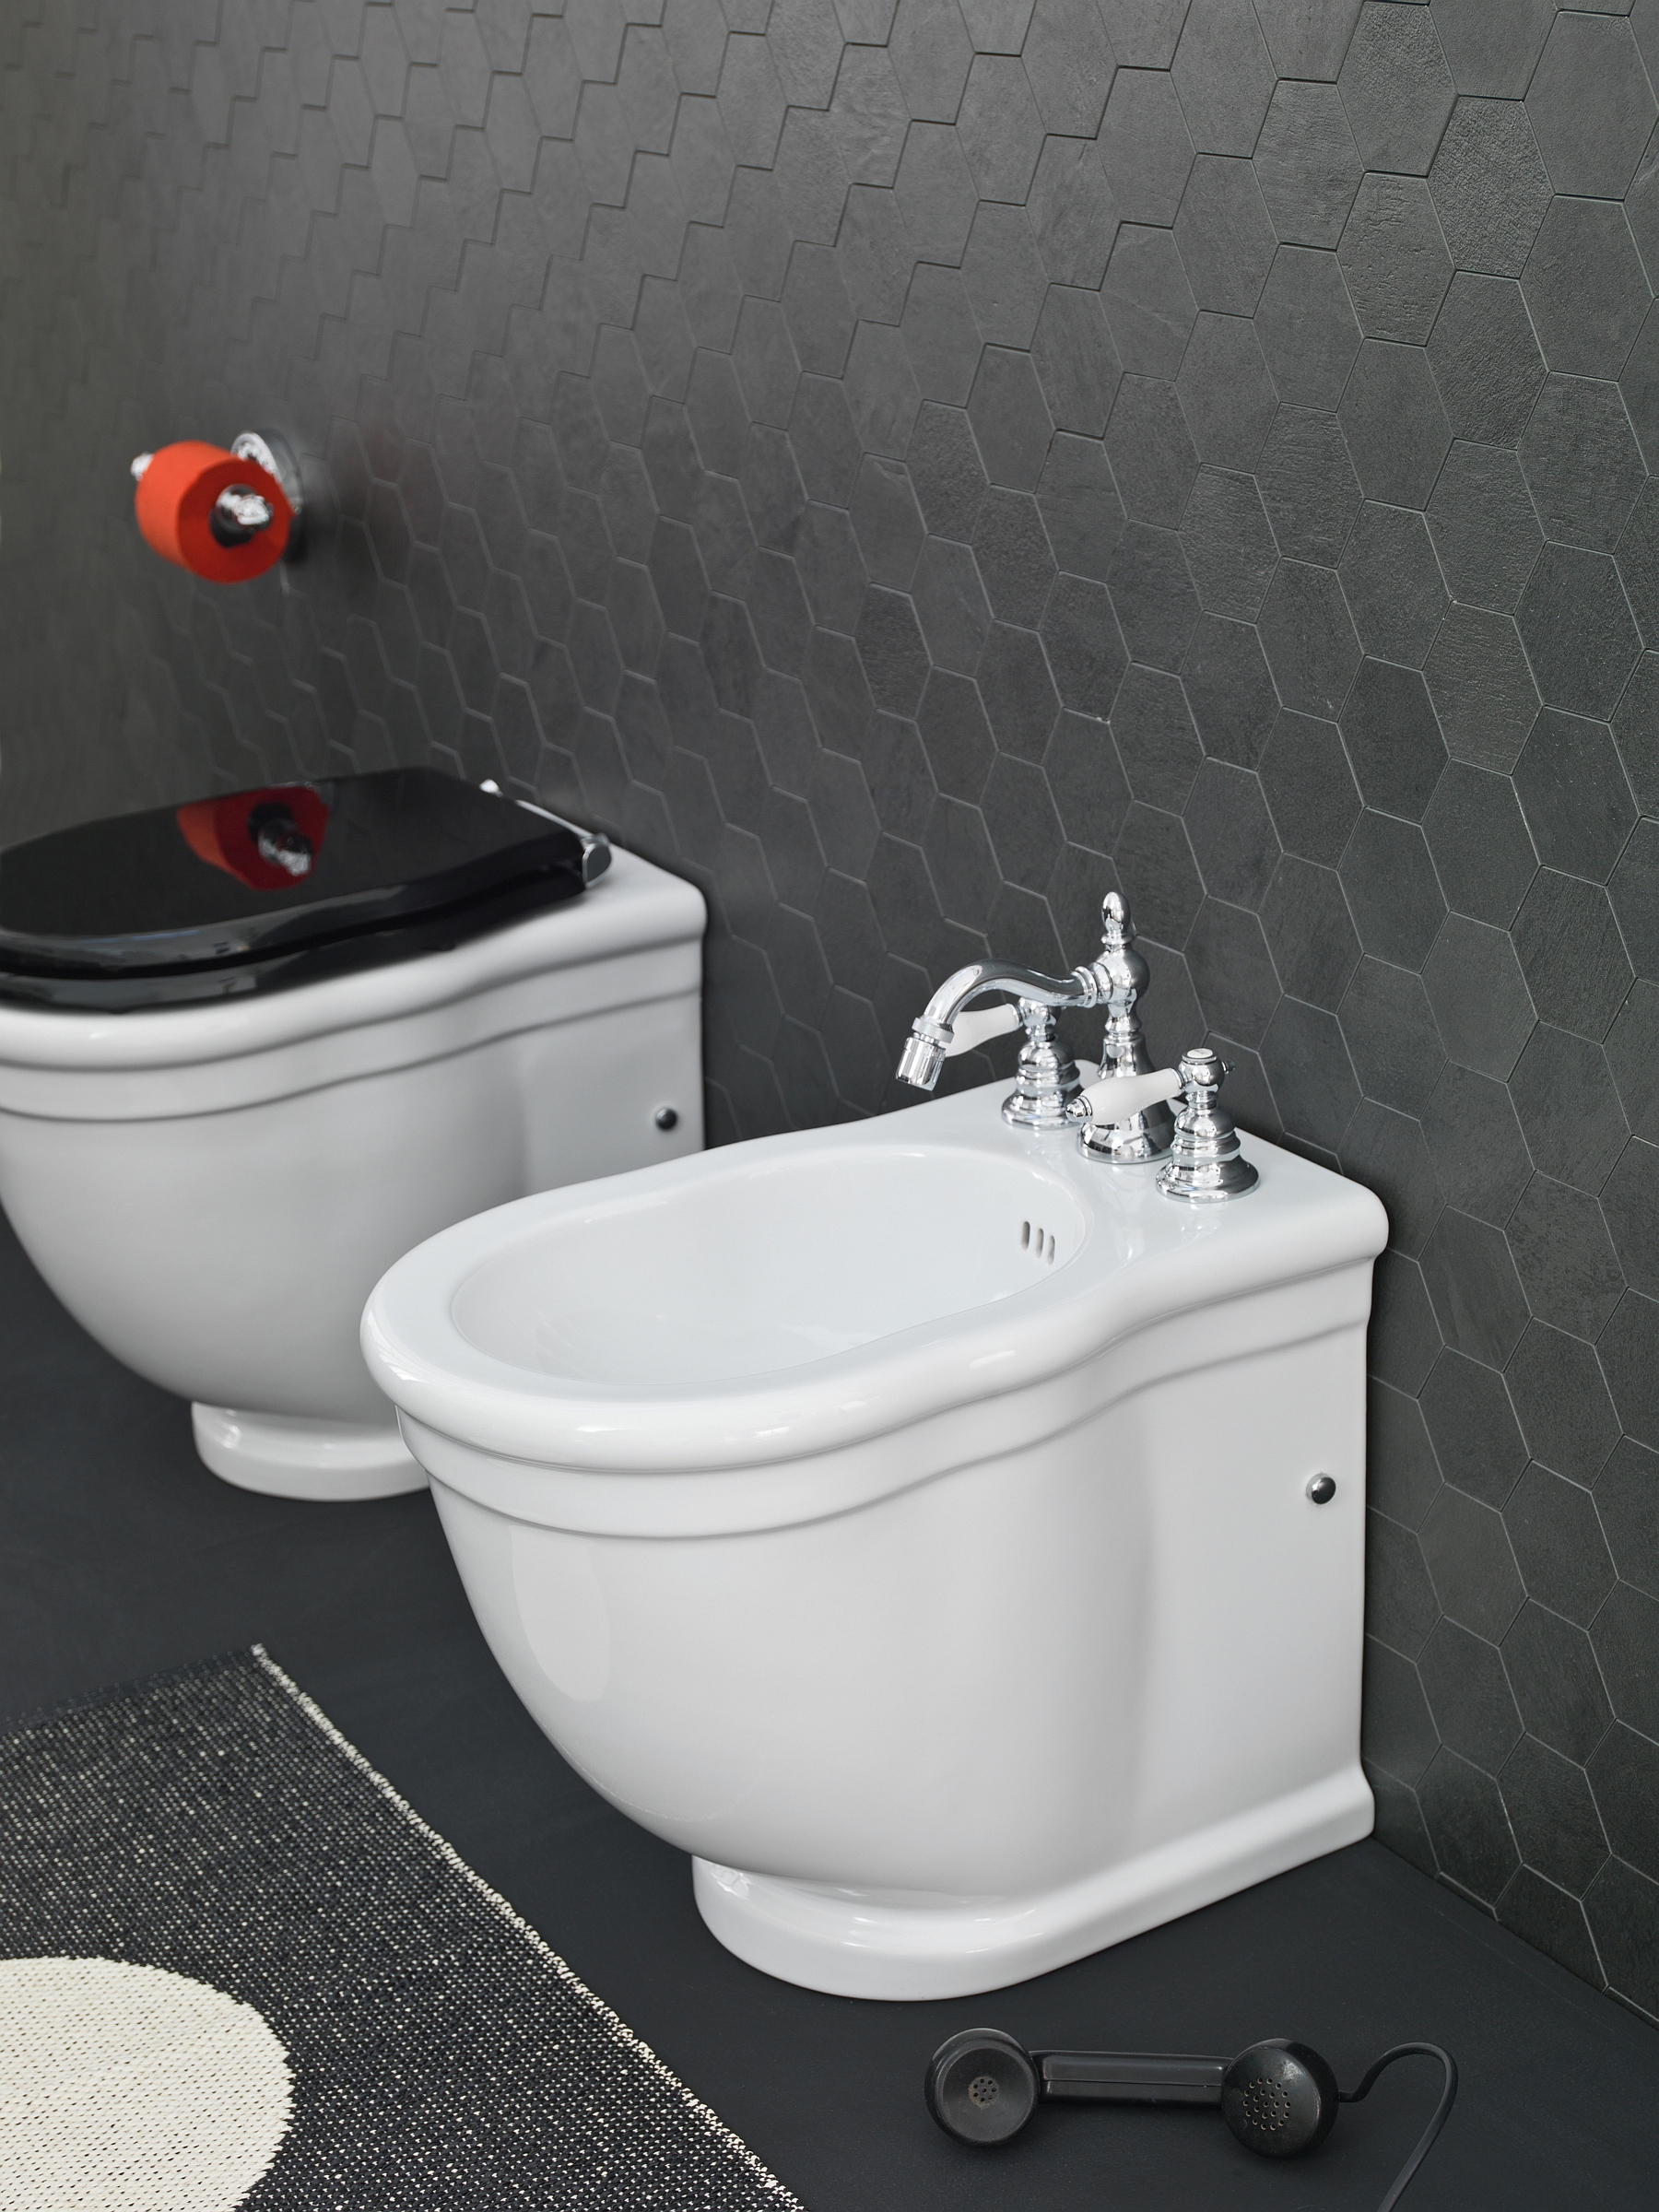 White wc with black lids are one of the hottest trends in bathroom design this year